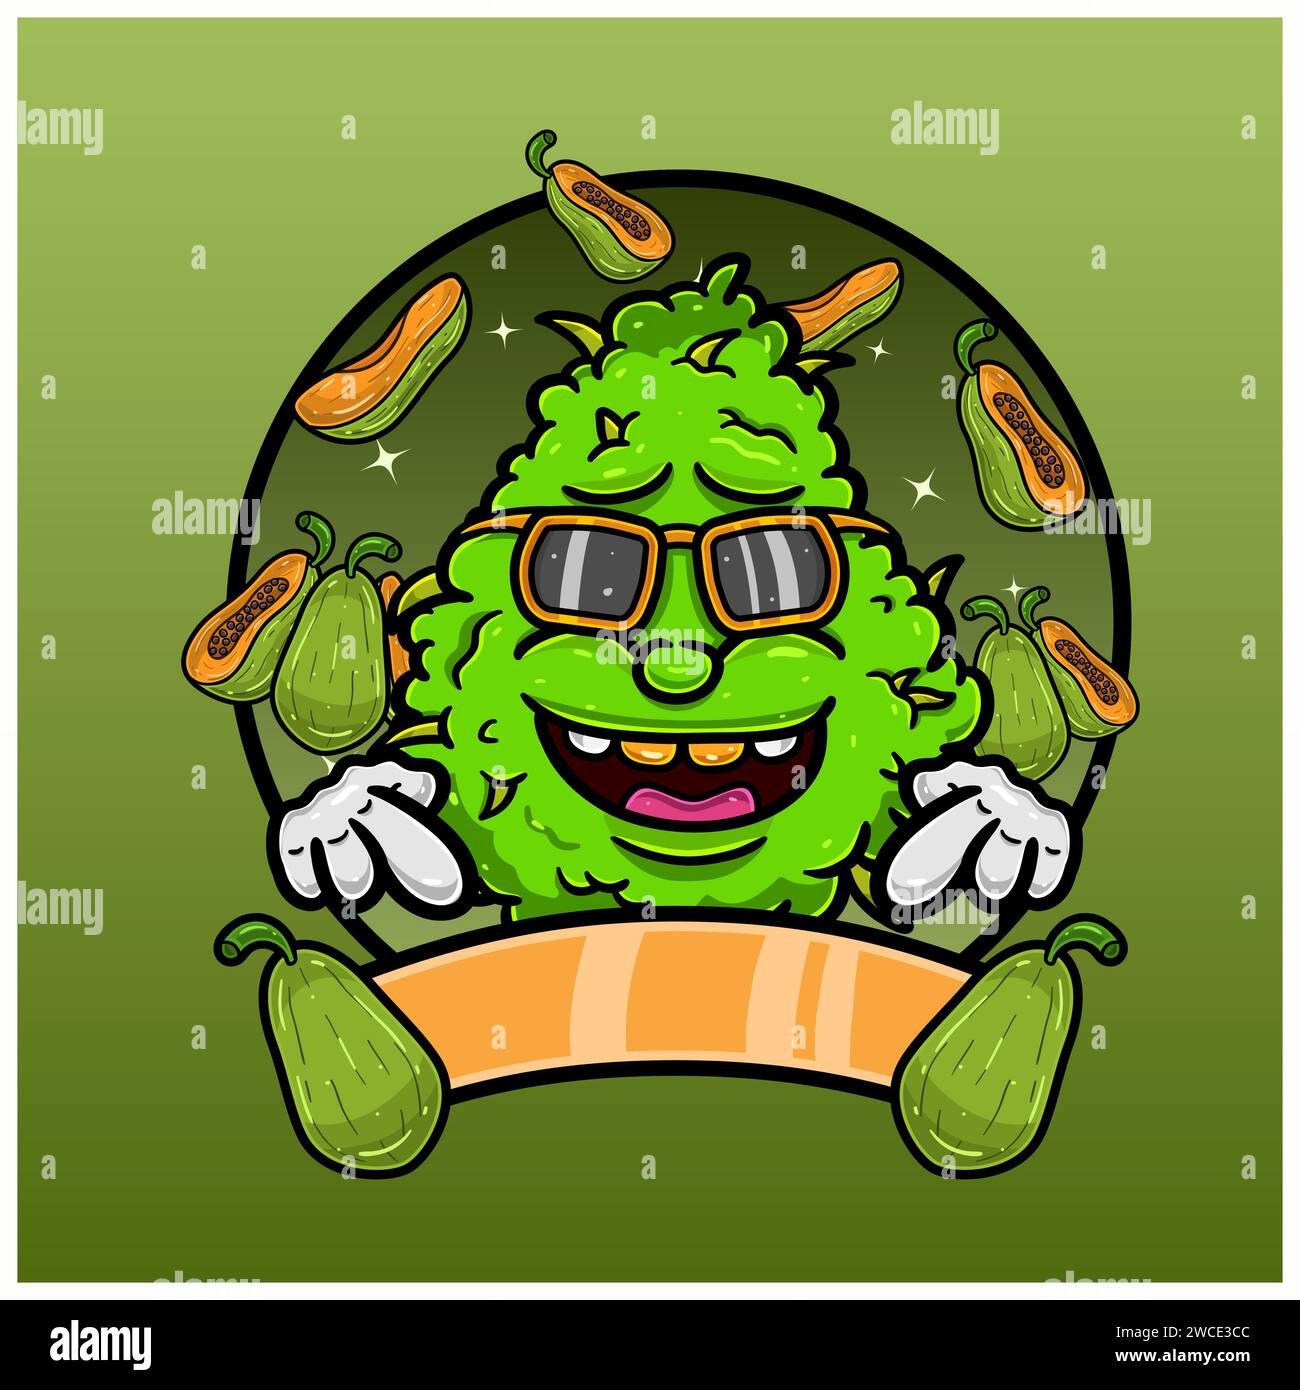 Papaya Flavor with Weed Mascot Cartoon. Weed Design For Logo, Label and Packaging Product. Vector and Illustration. Stock Vector